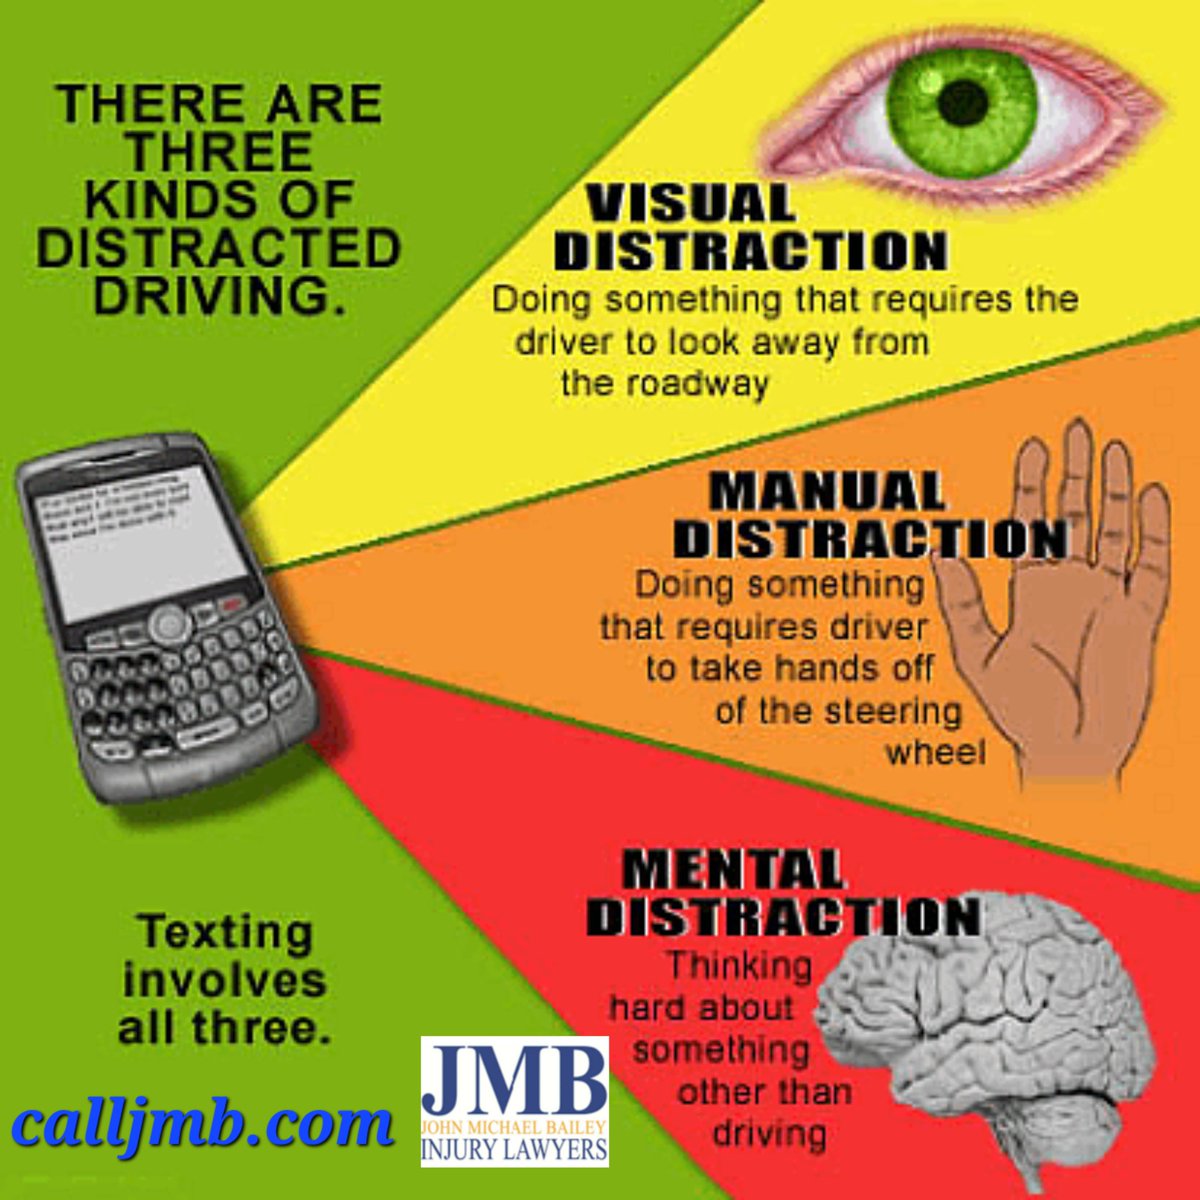 April is National Distracted Driving Awareness Month, and the team John Michael Bailey Injury Lawyers wants to raise awareness about this increasing problem on our Tennessee & Mississippi roads & highways.
#DistractedDrivingAwareness #JMBInjuryLawyers #CallMeNow #WeFight